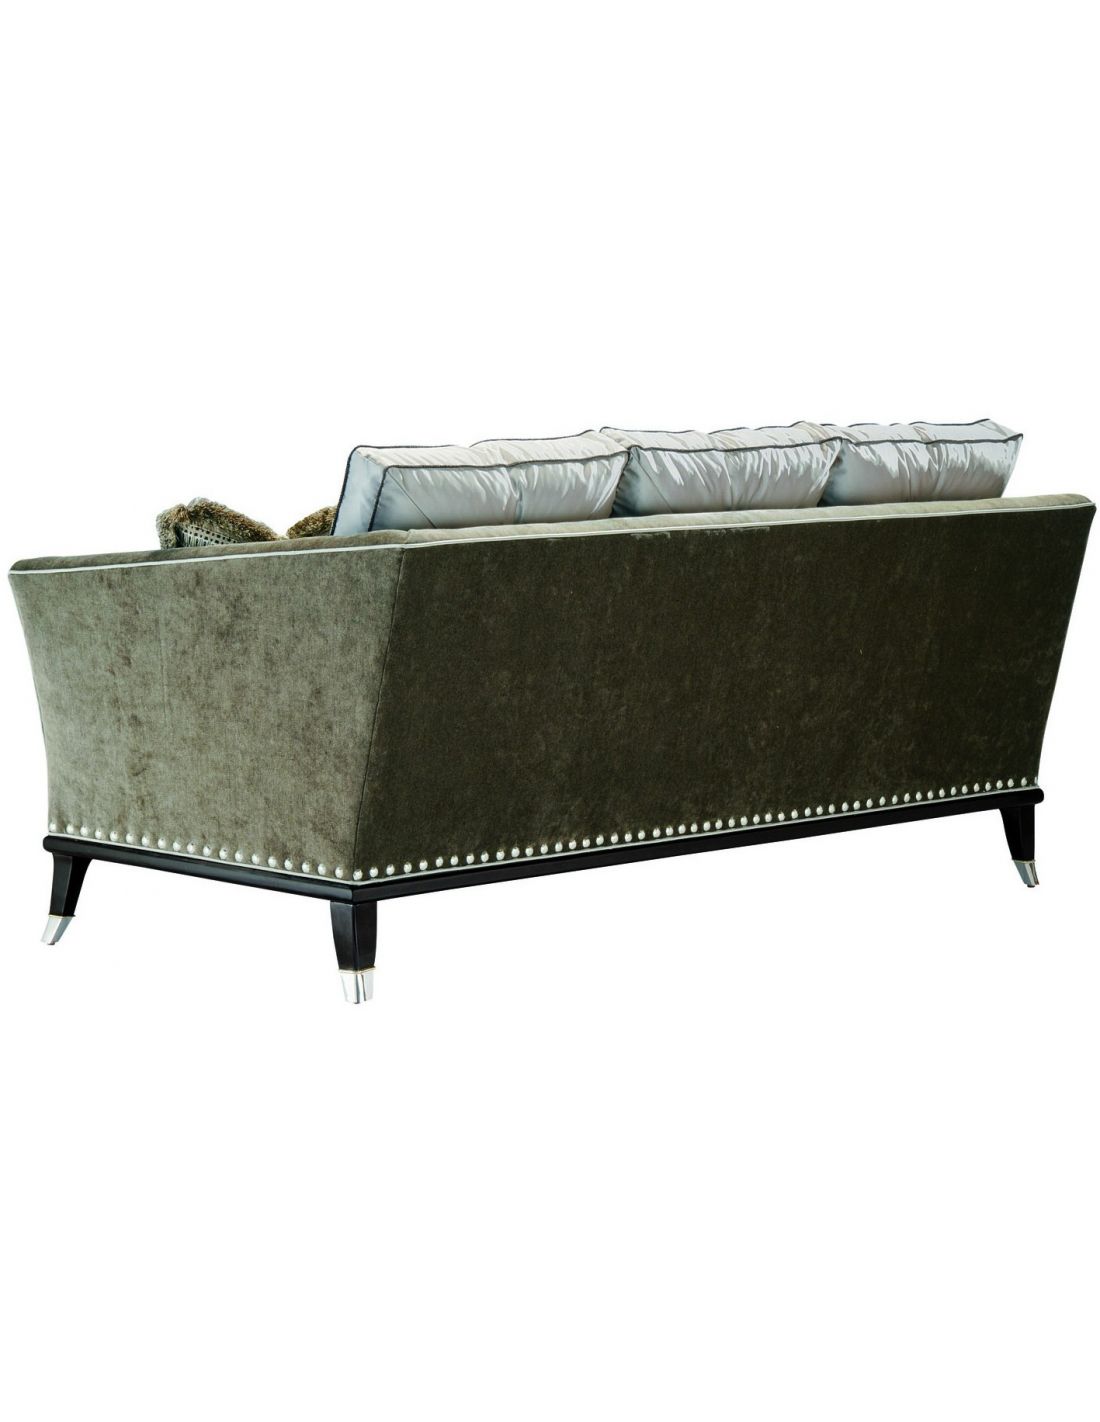 https://bernadettelivingston.com/12347-thickbox_default/modern-style-sofa-with-contrasting-tufted-back-cushions.jpg